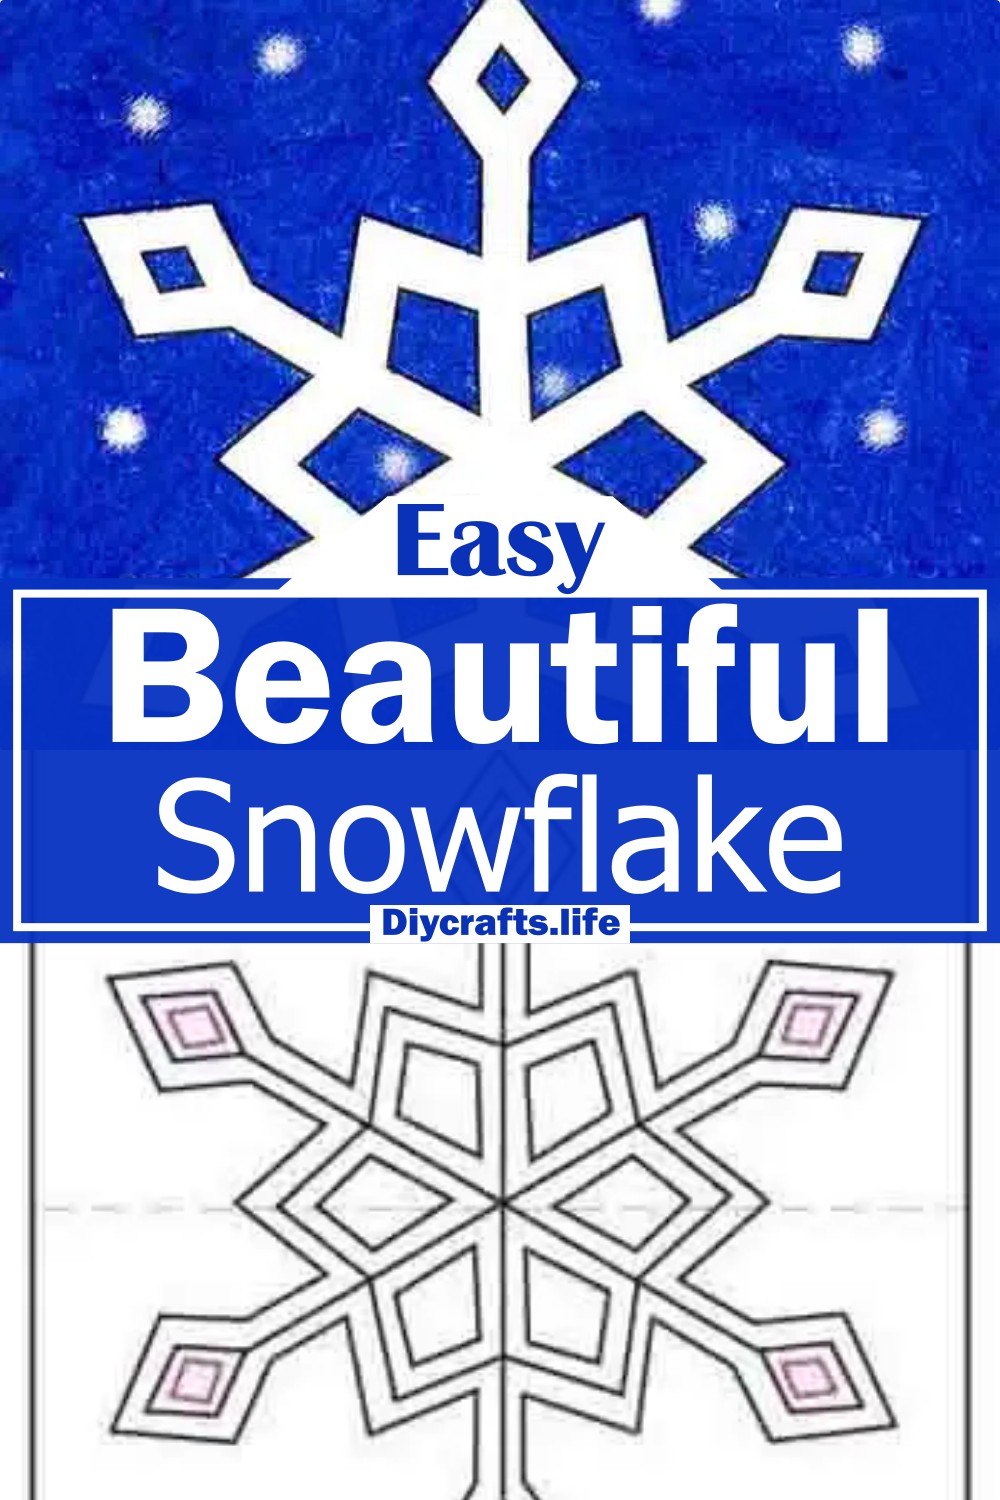 Belle With Snowflakes